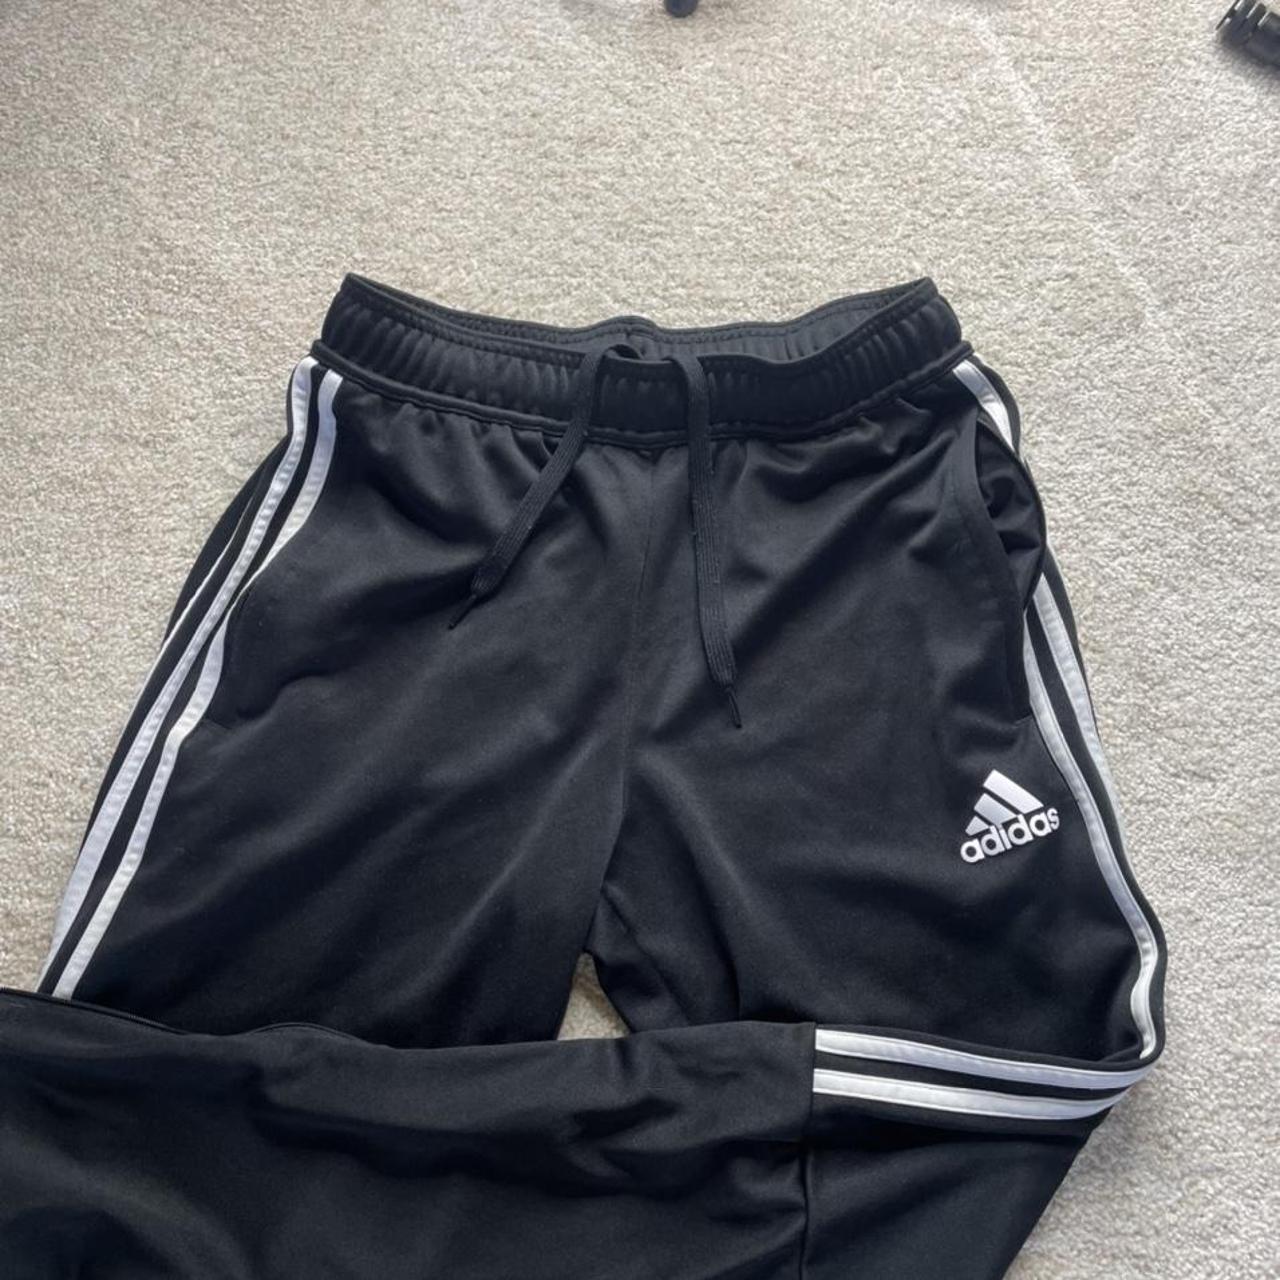 Adidas joggers Worn a couple times - Depop